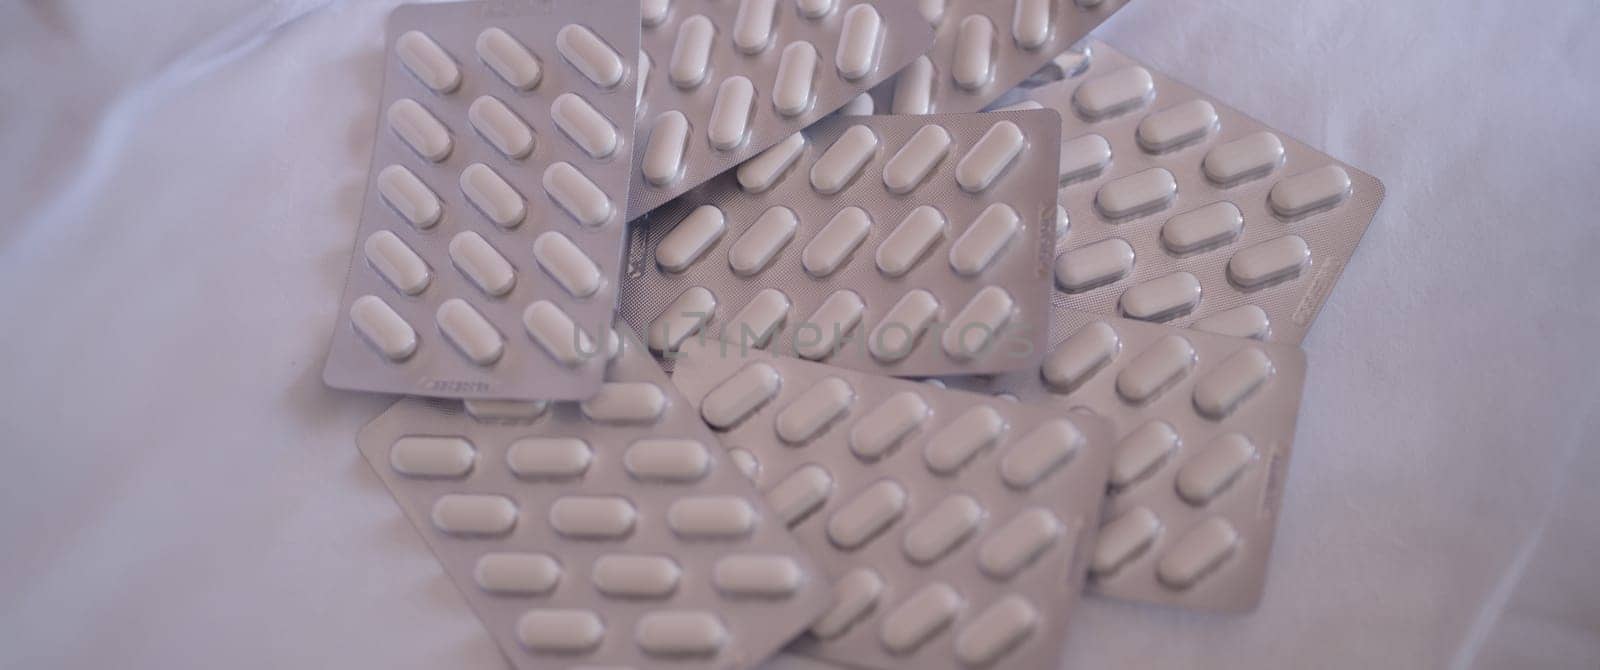 Pile of medical pills in blister pack closeup by kuprevich